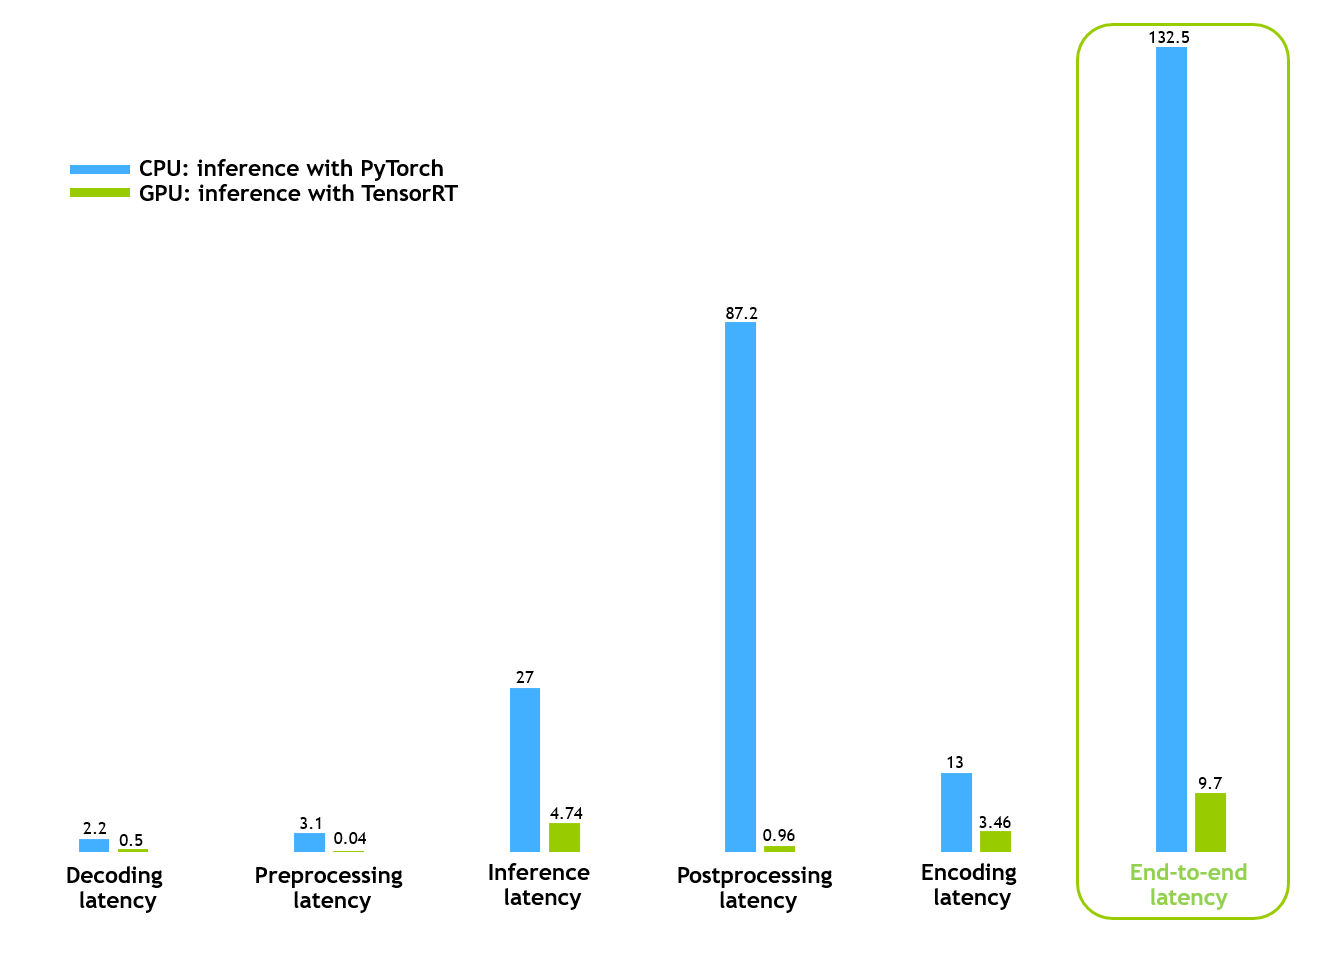 A comparison of preprocessing, inference, and post-processing latency showing lower latency for GPU-based CV-CUDA compared to OpenCV CPU. Results include 0.096 ms compared to 87.2 ms for post-processing latency and 9.7 ms compared to 132.5 ms for end-to-end latency.